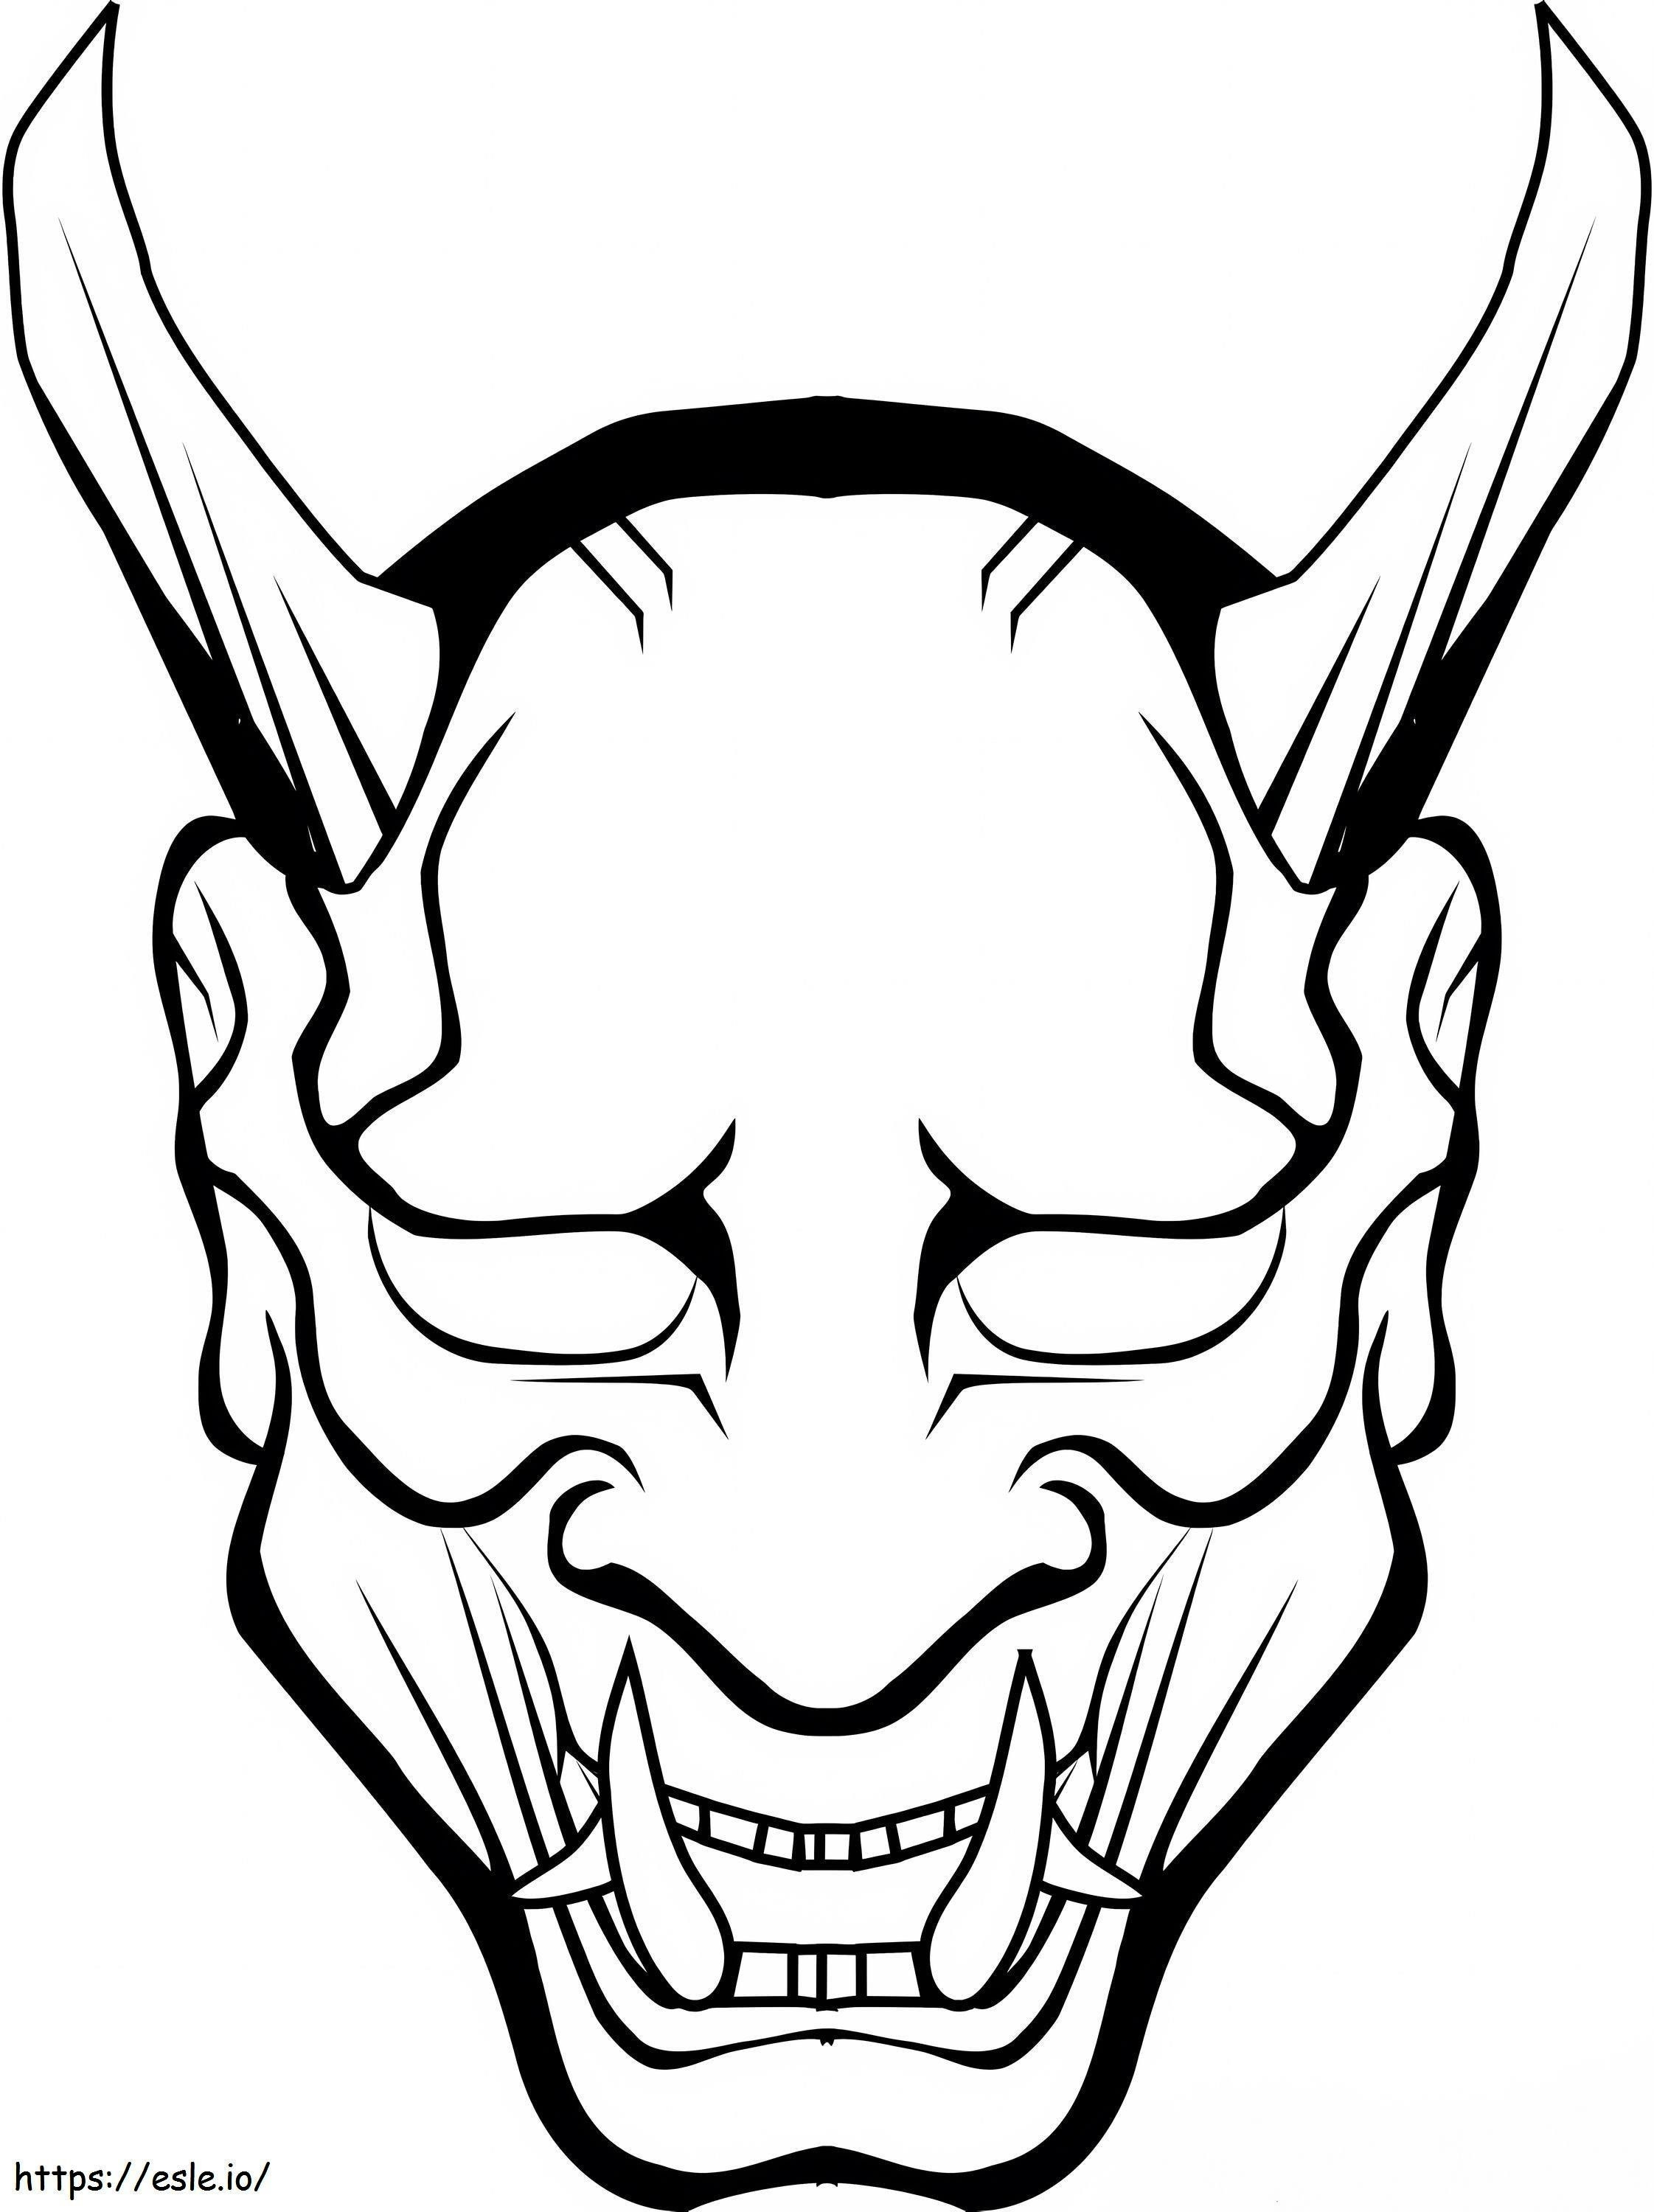 Monster Mask coloring page